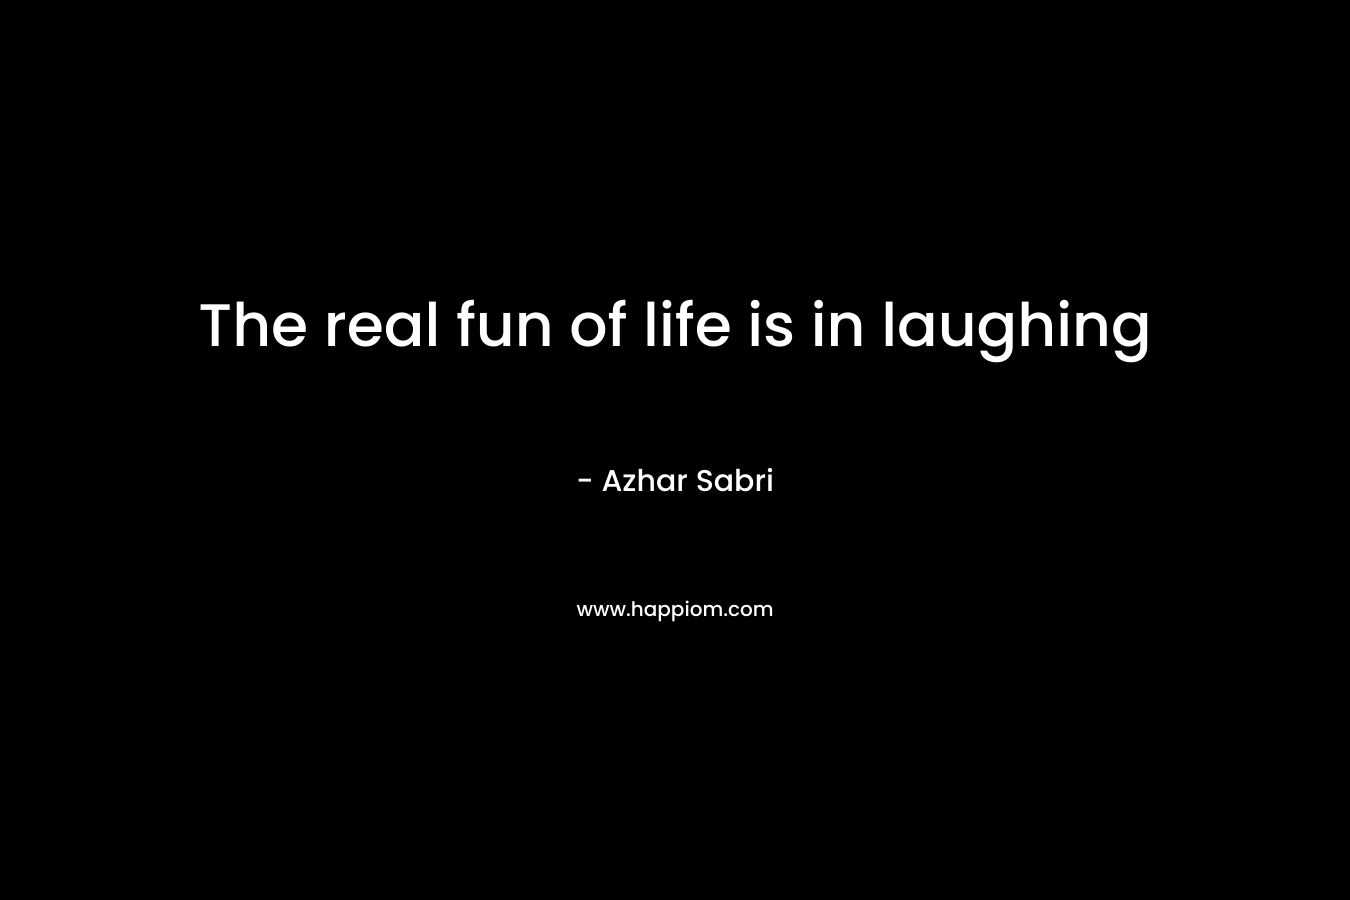 The real fun of life is in laughing – Azhar Sabri